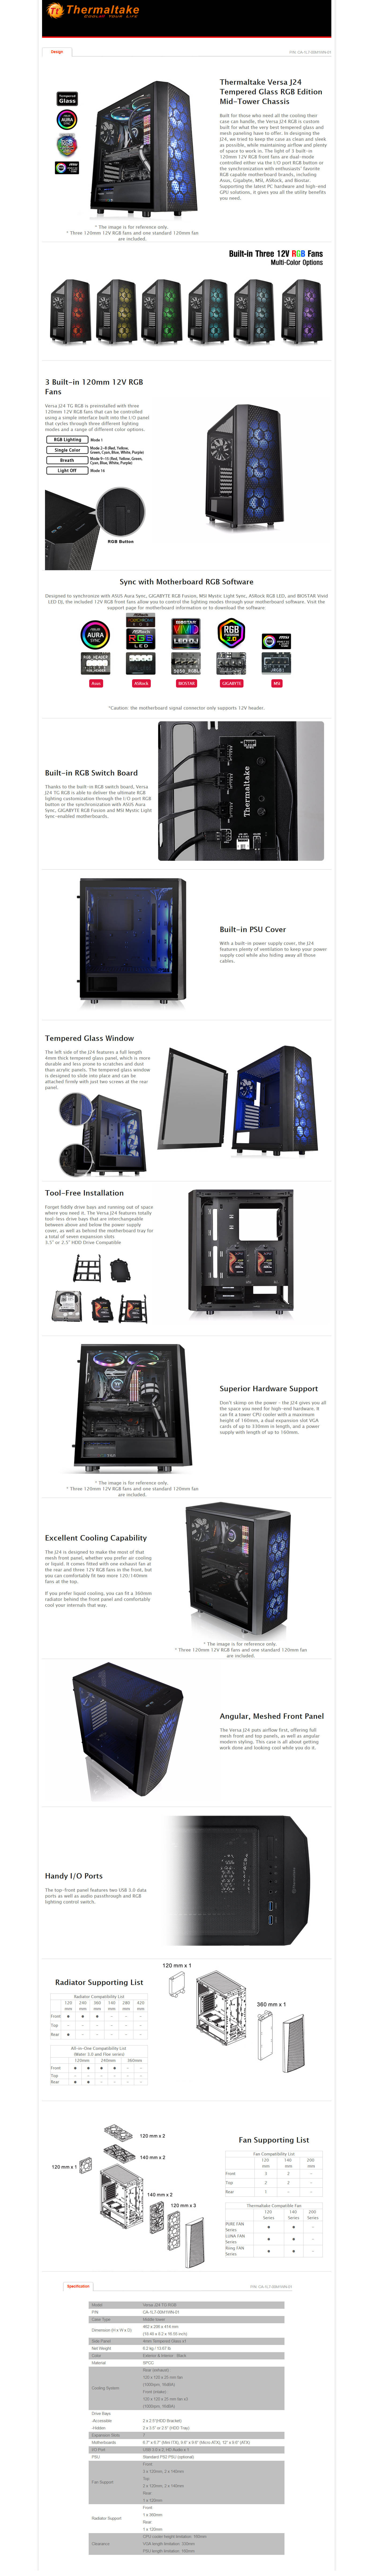  Buy Online Thermaltake Versa J24 Tempered Glass RGB Edition Mid Tower Chassis (CA-1L7-00M1WN-01)